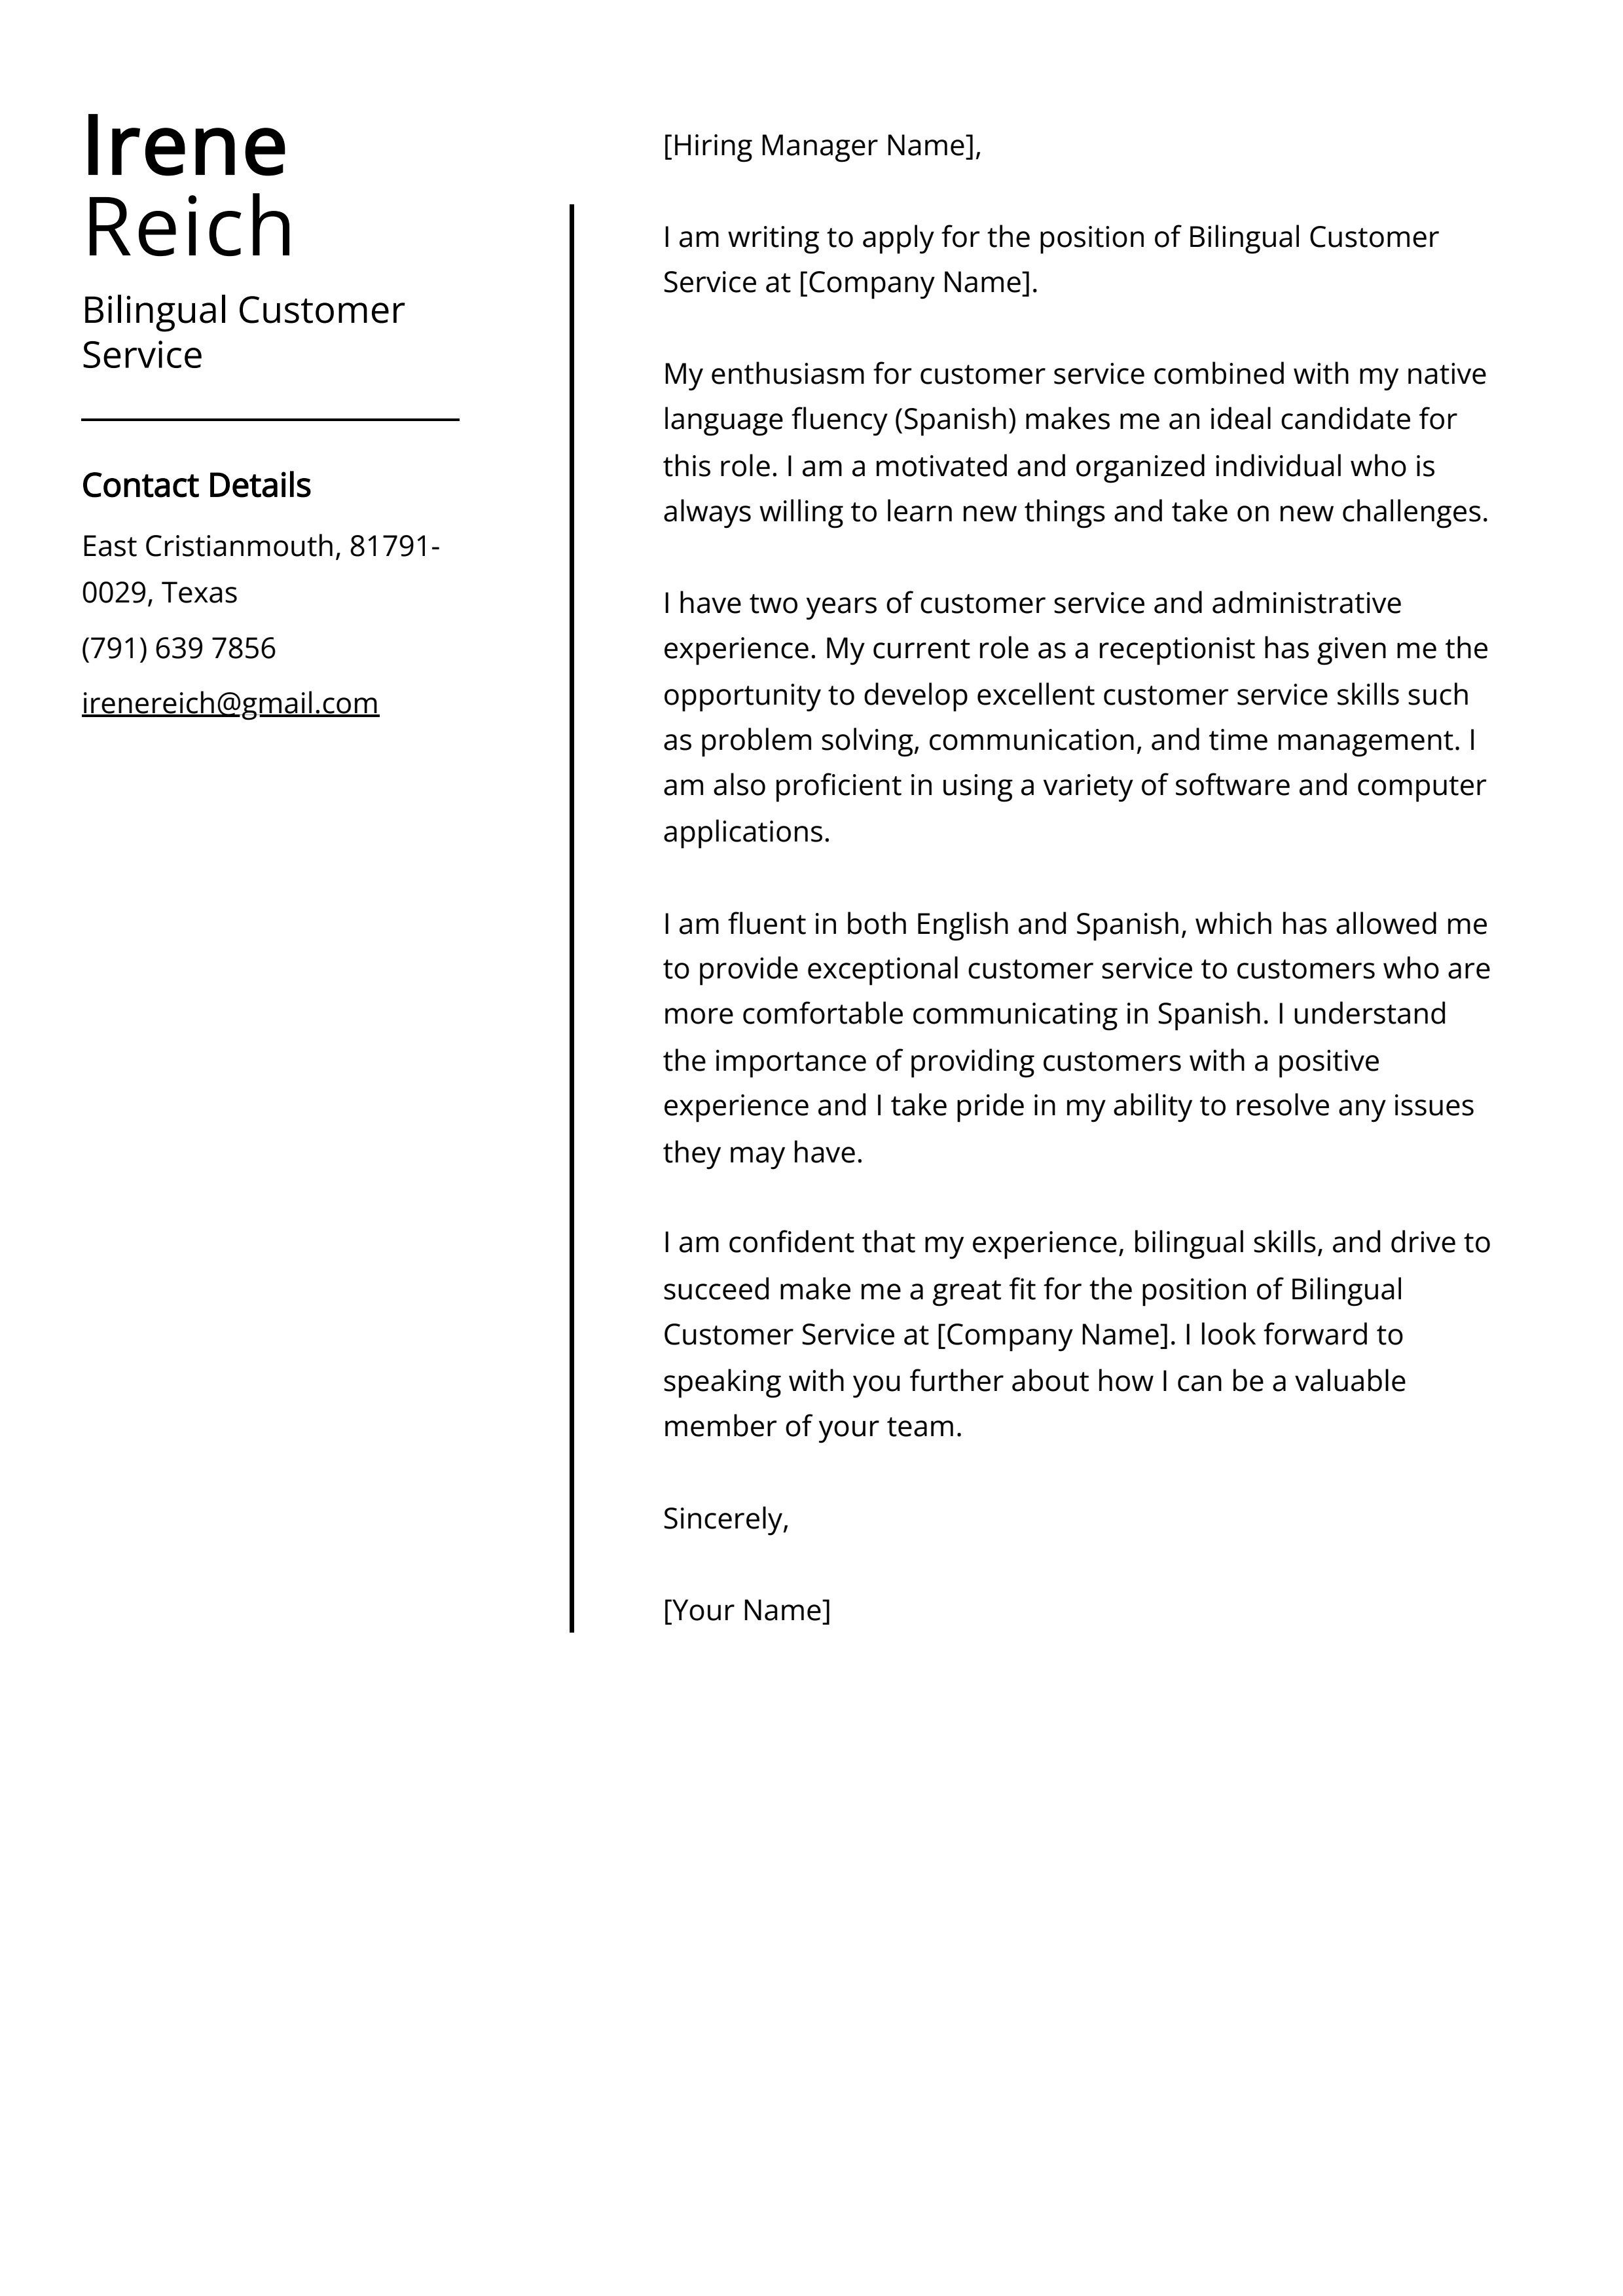 Bilingual Customer Service Cover Letter Example